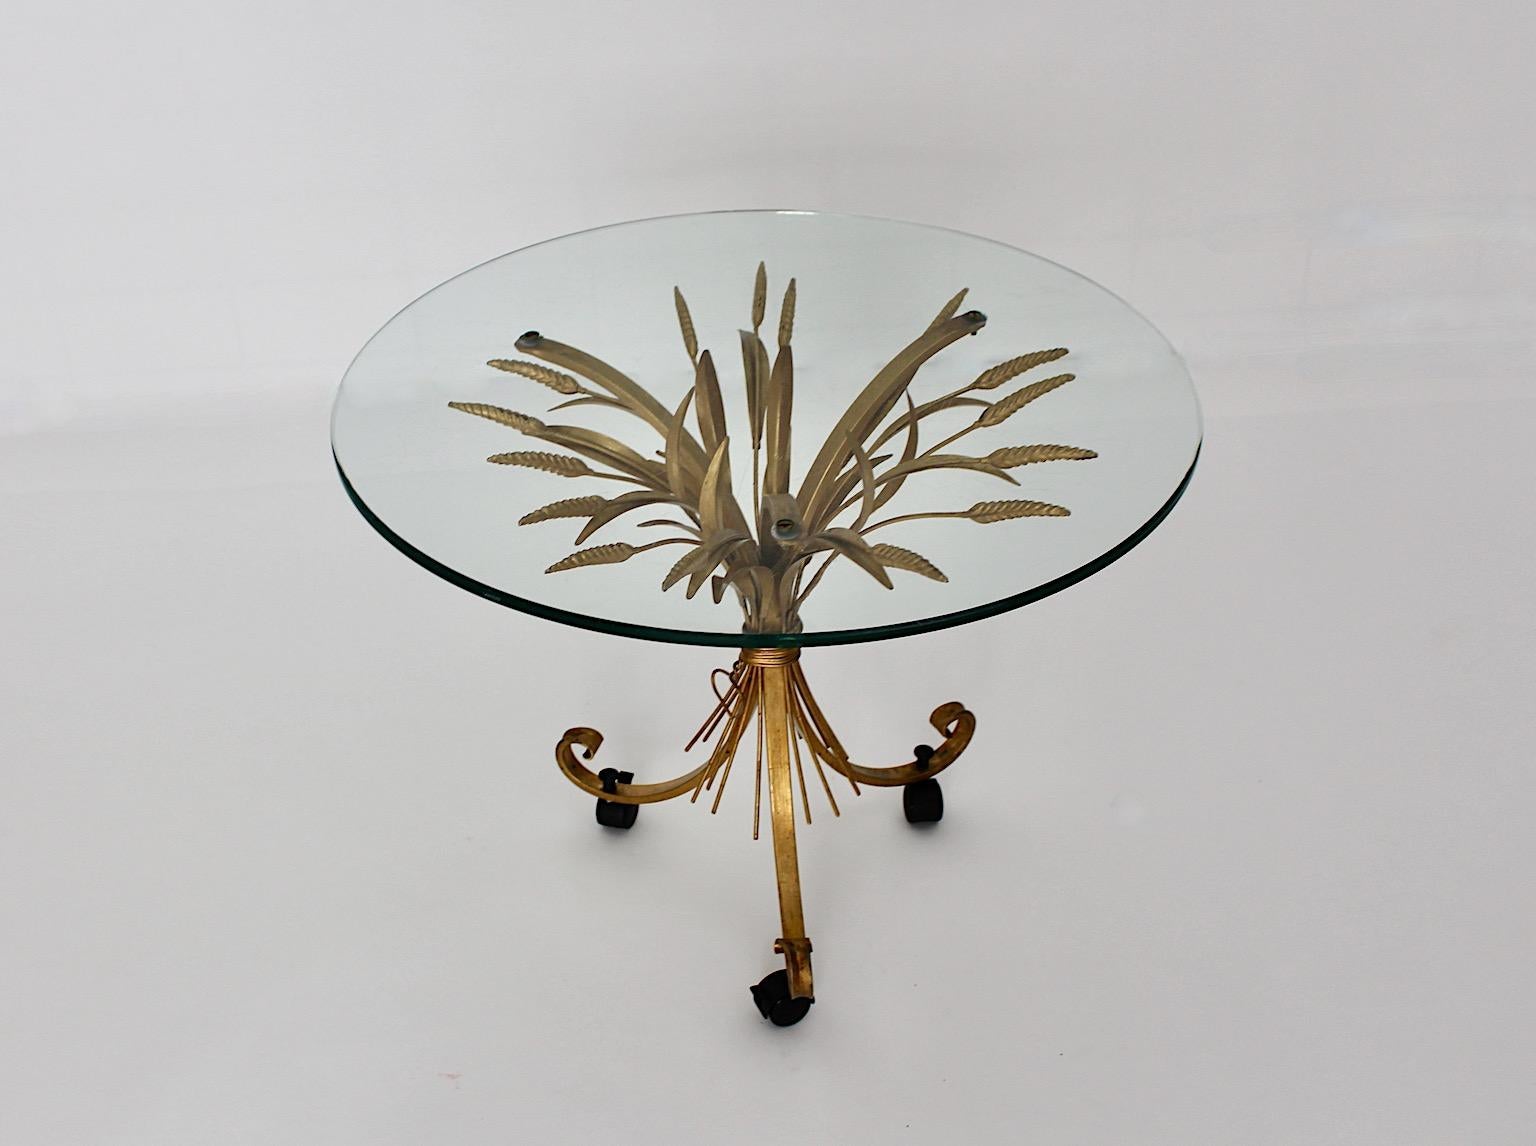 Golden Metal Vintage Hollywood Regency Style Coco Chanel Style Coffee Table 1970 For Sale 3